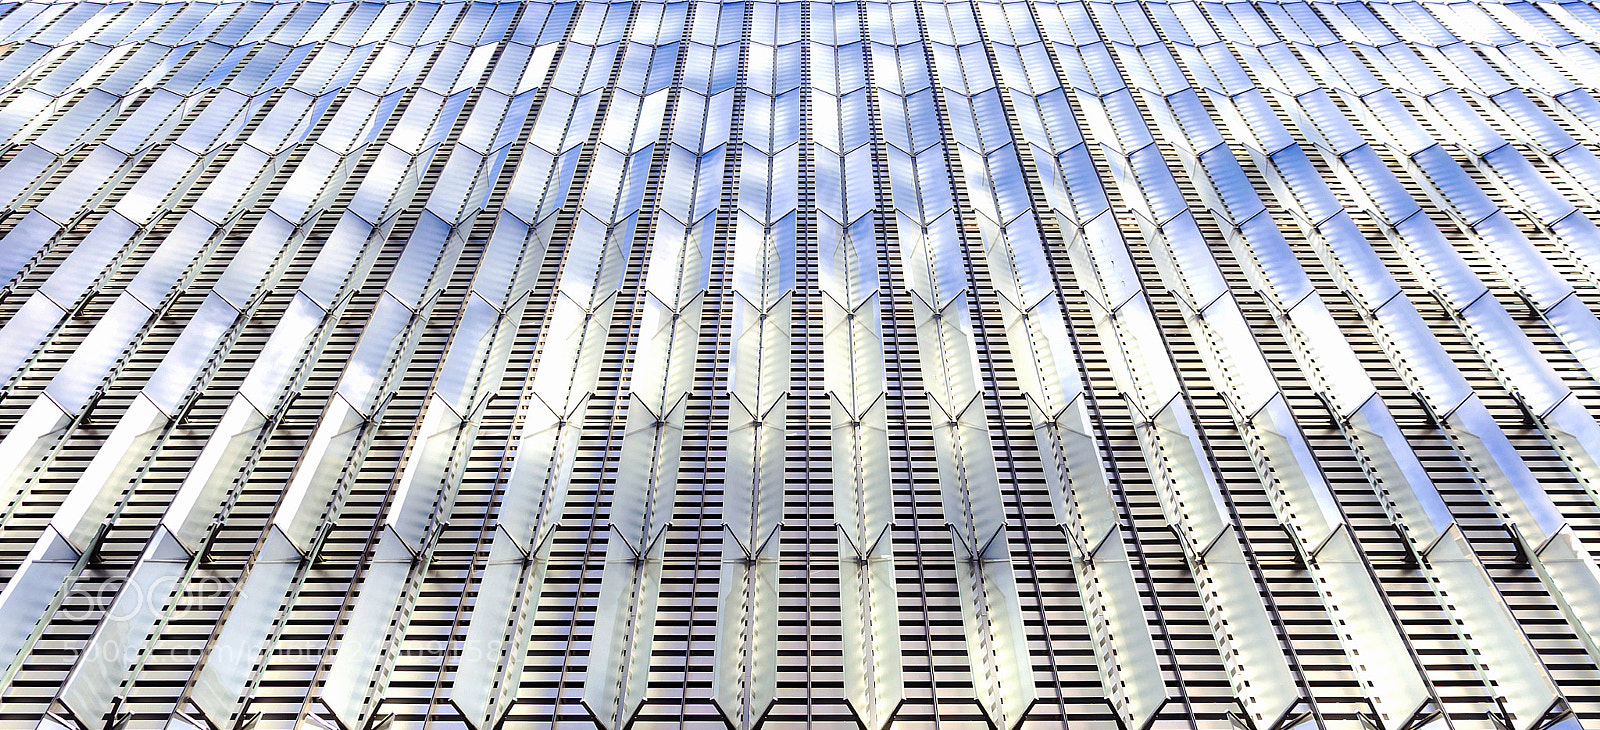 Nikon D7100 sample photo. Architectural pattern with glass photography